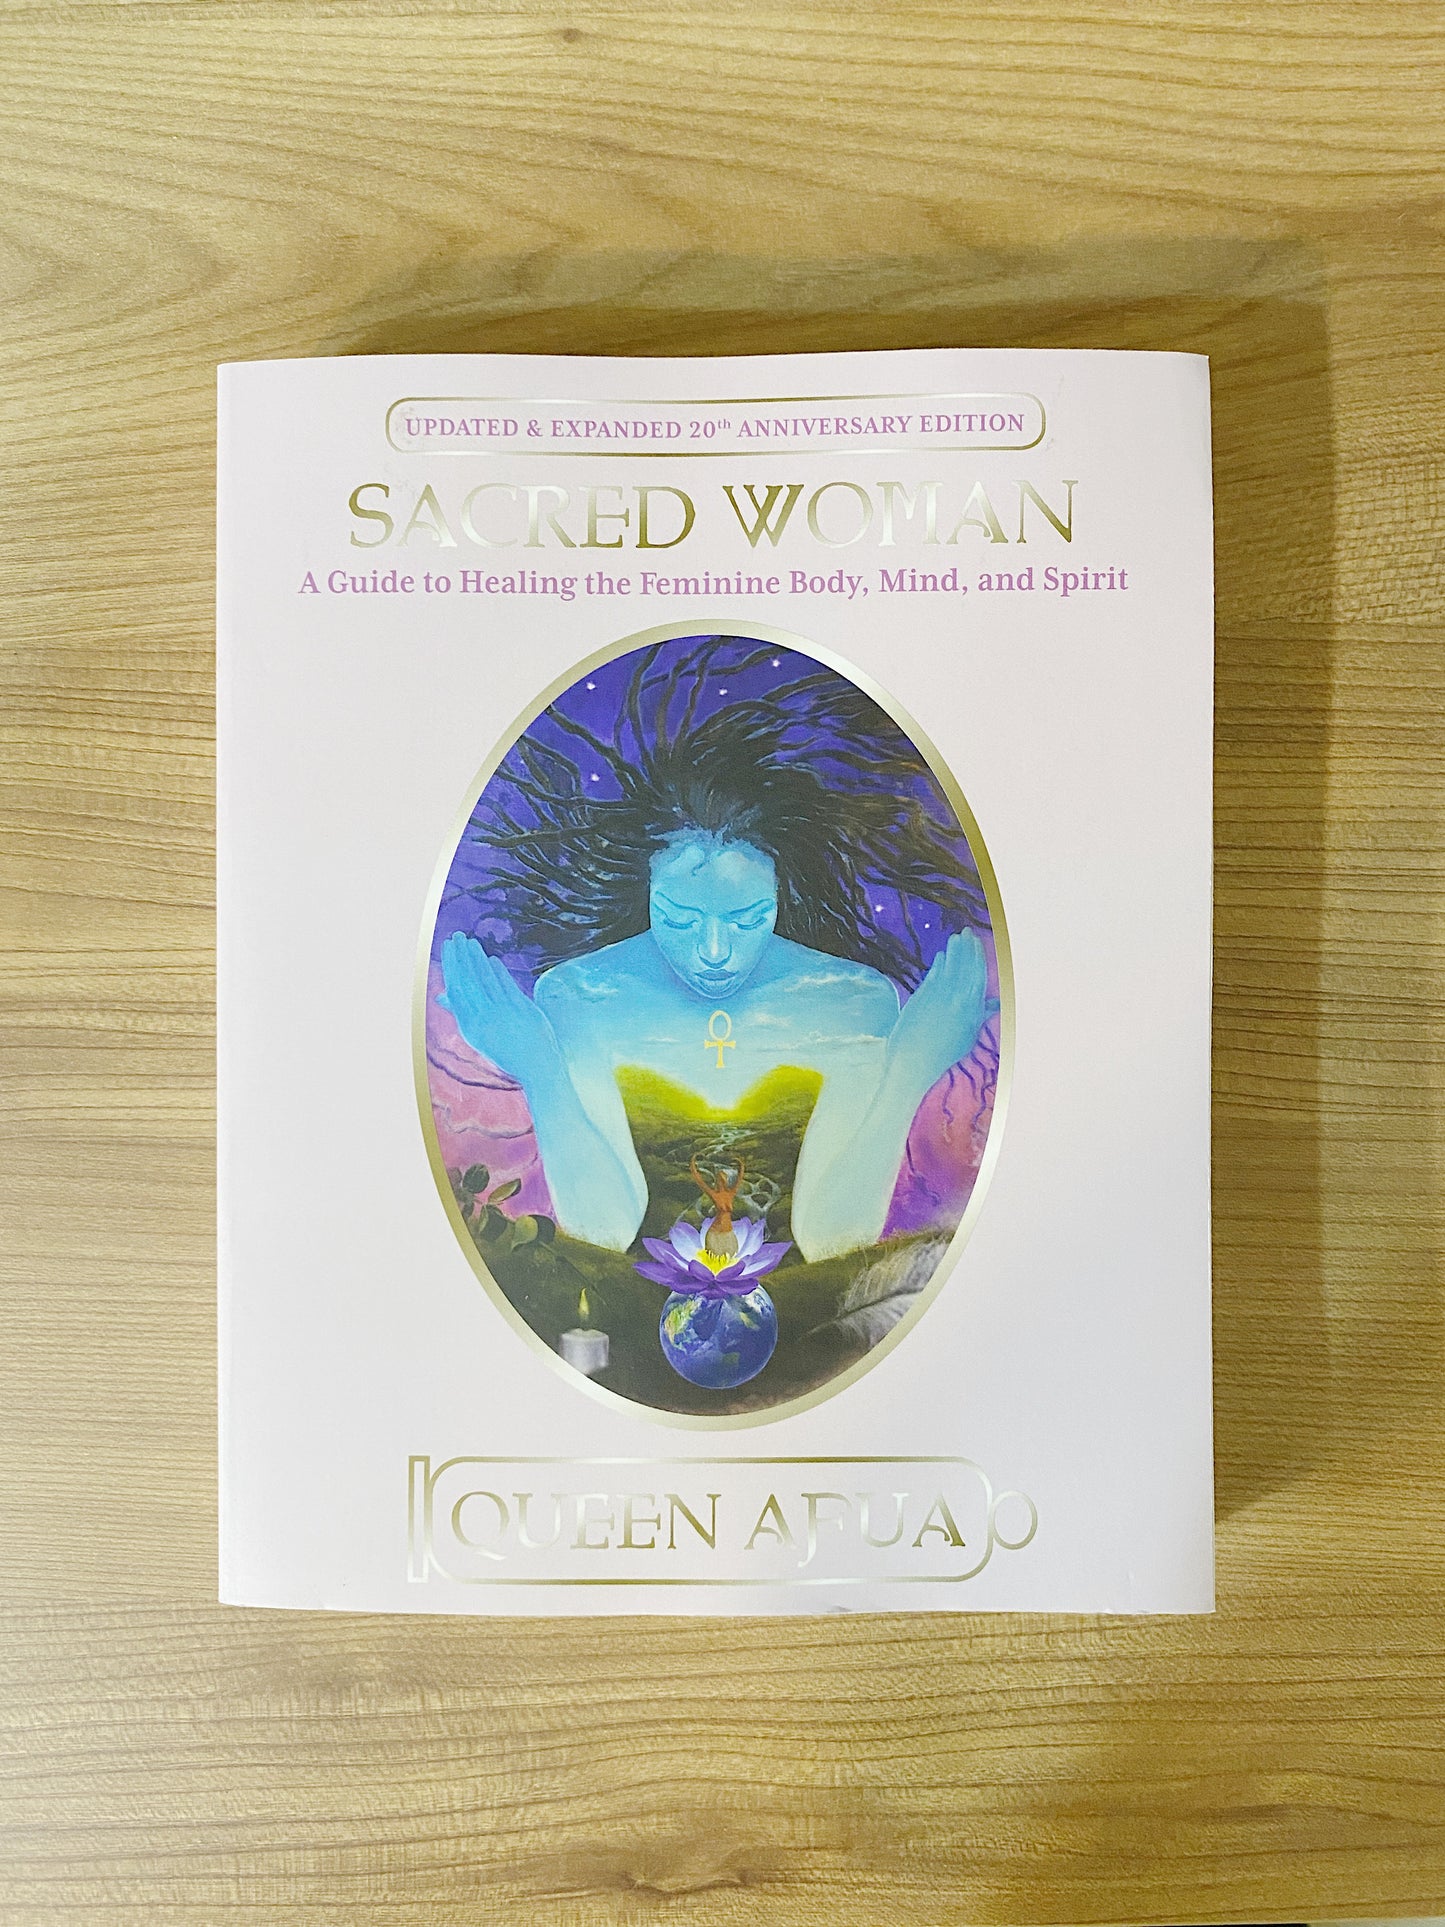 Queen Afua - Sacred Woman: A Guide to Healing the Feminine Body, Mind, and Spirit